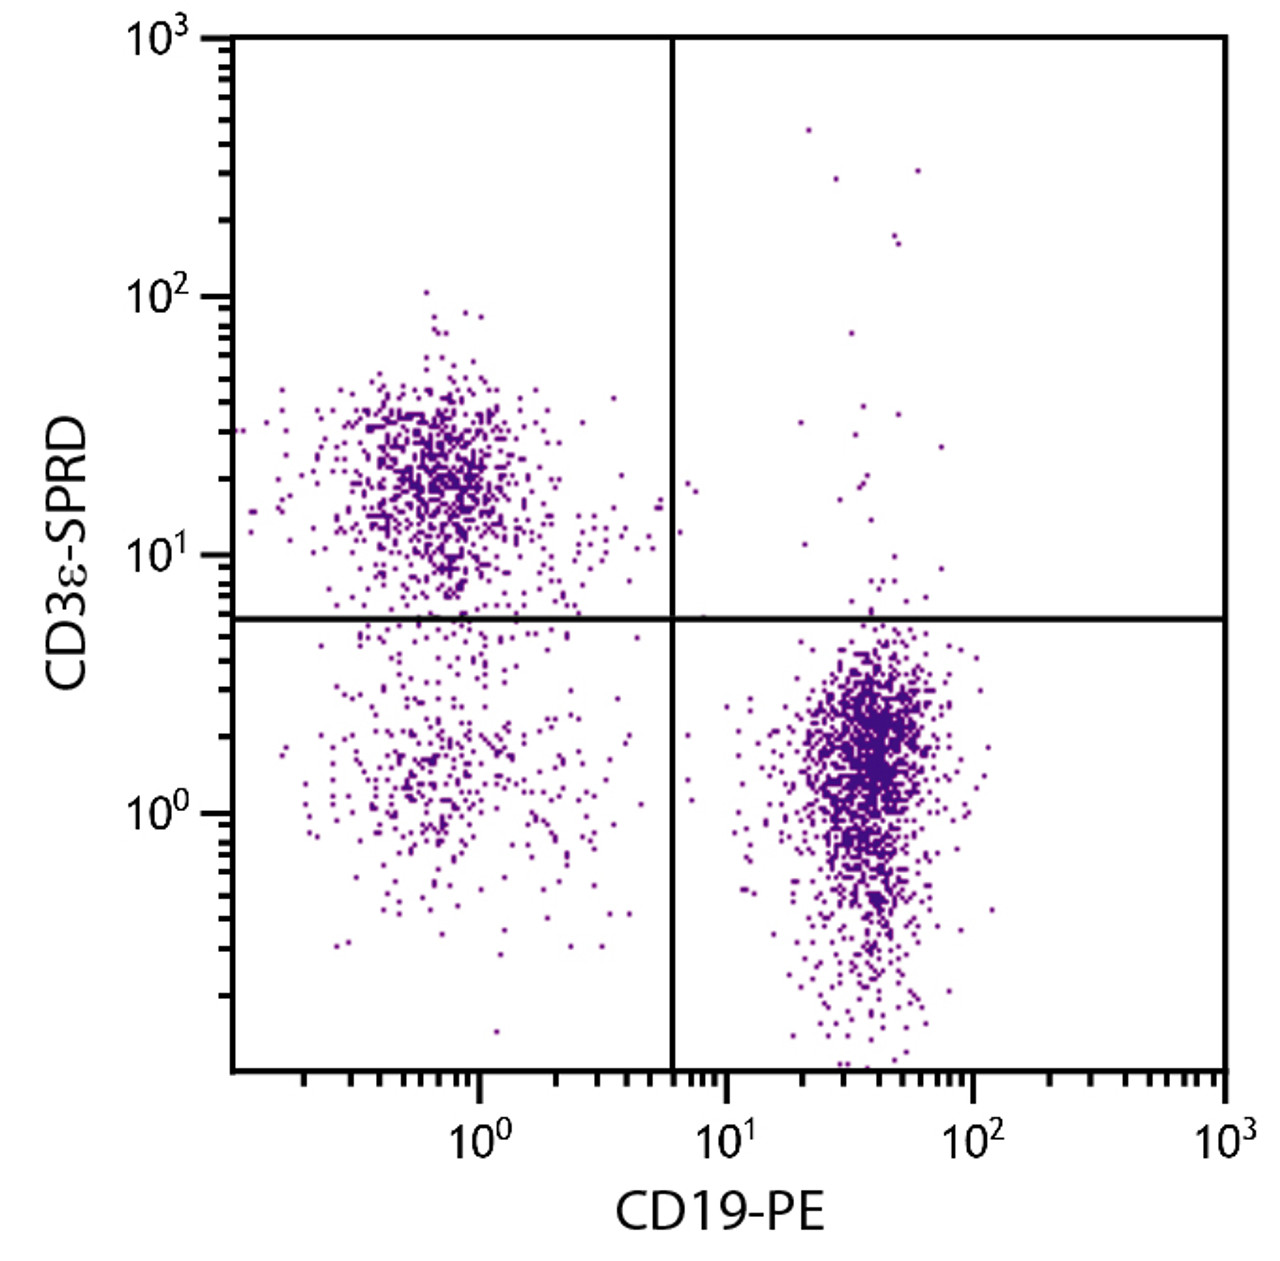 BALB/c mouse splenocytes were stained with Hamster Anti-Mouse CD3?-SPRD (Cat. No. 98-563) and Rat Anti-Mouse CD19-PE .